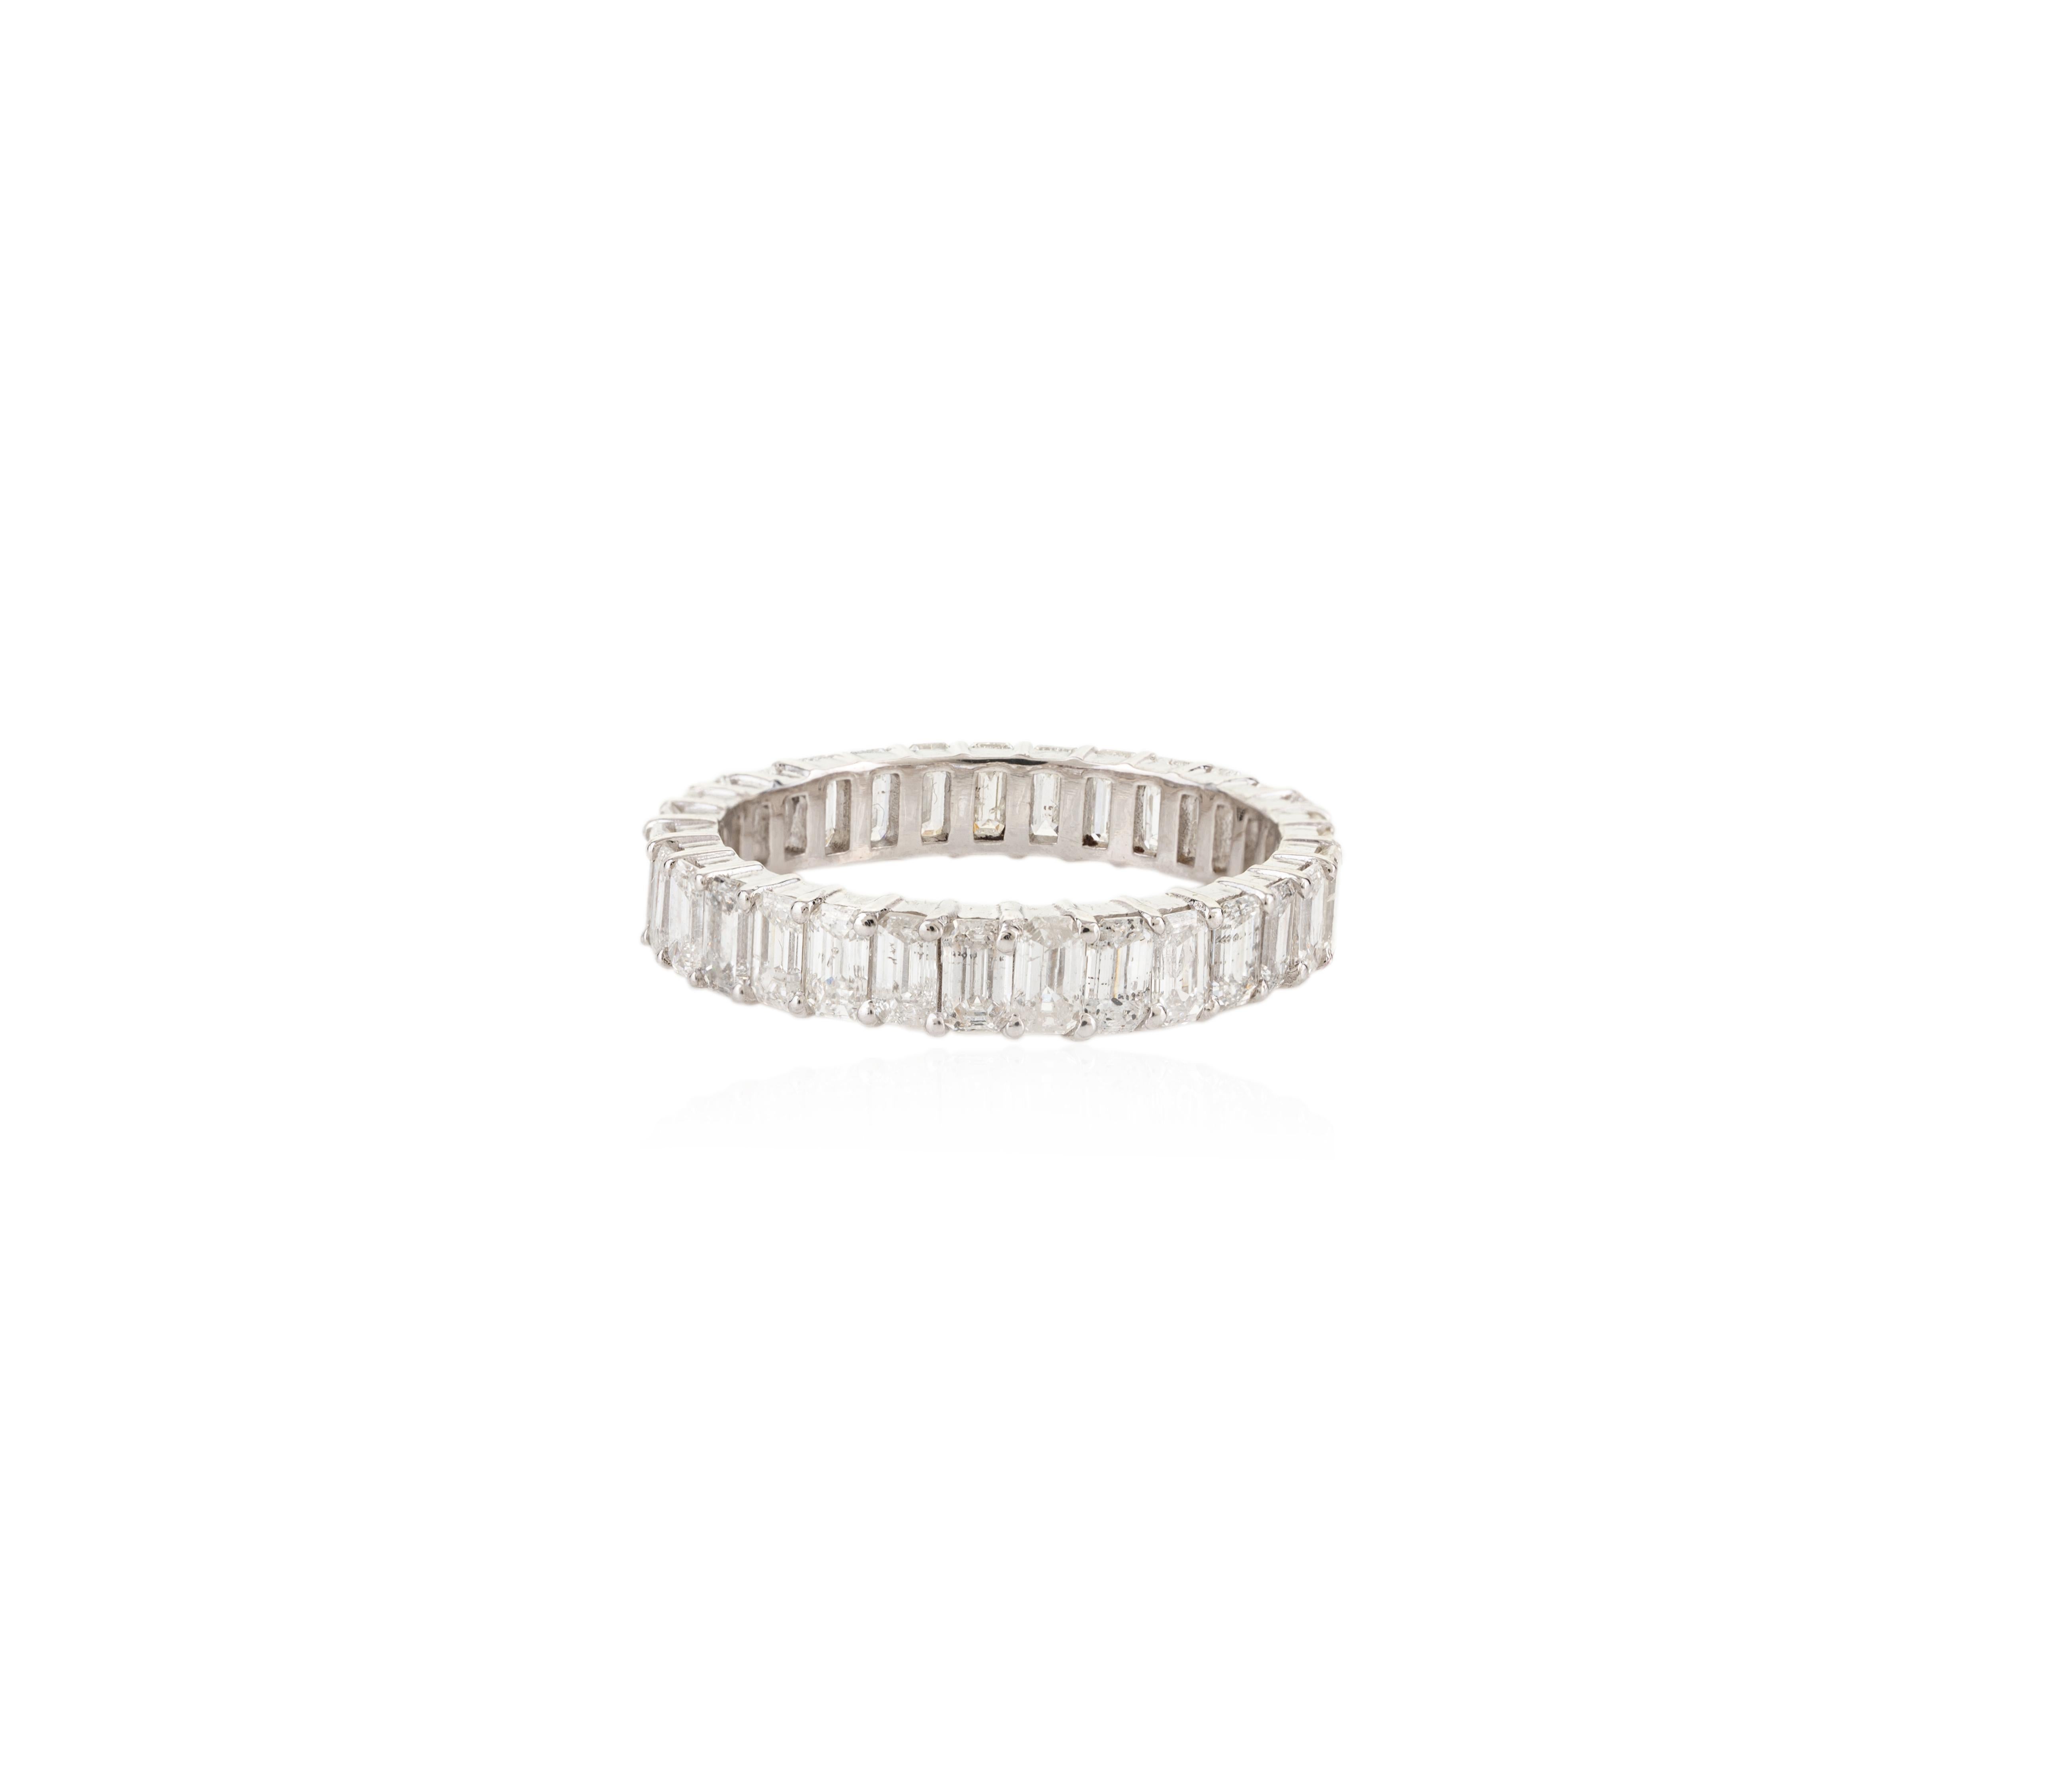 For Sale:  2.86 Carat Emerald Cut Diamond Eternity Band Ring in 14k Solid White Gold 3